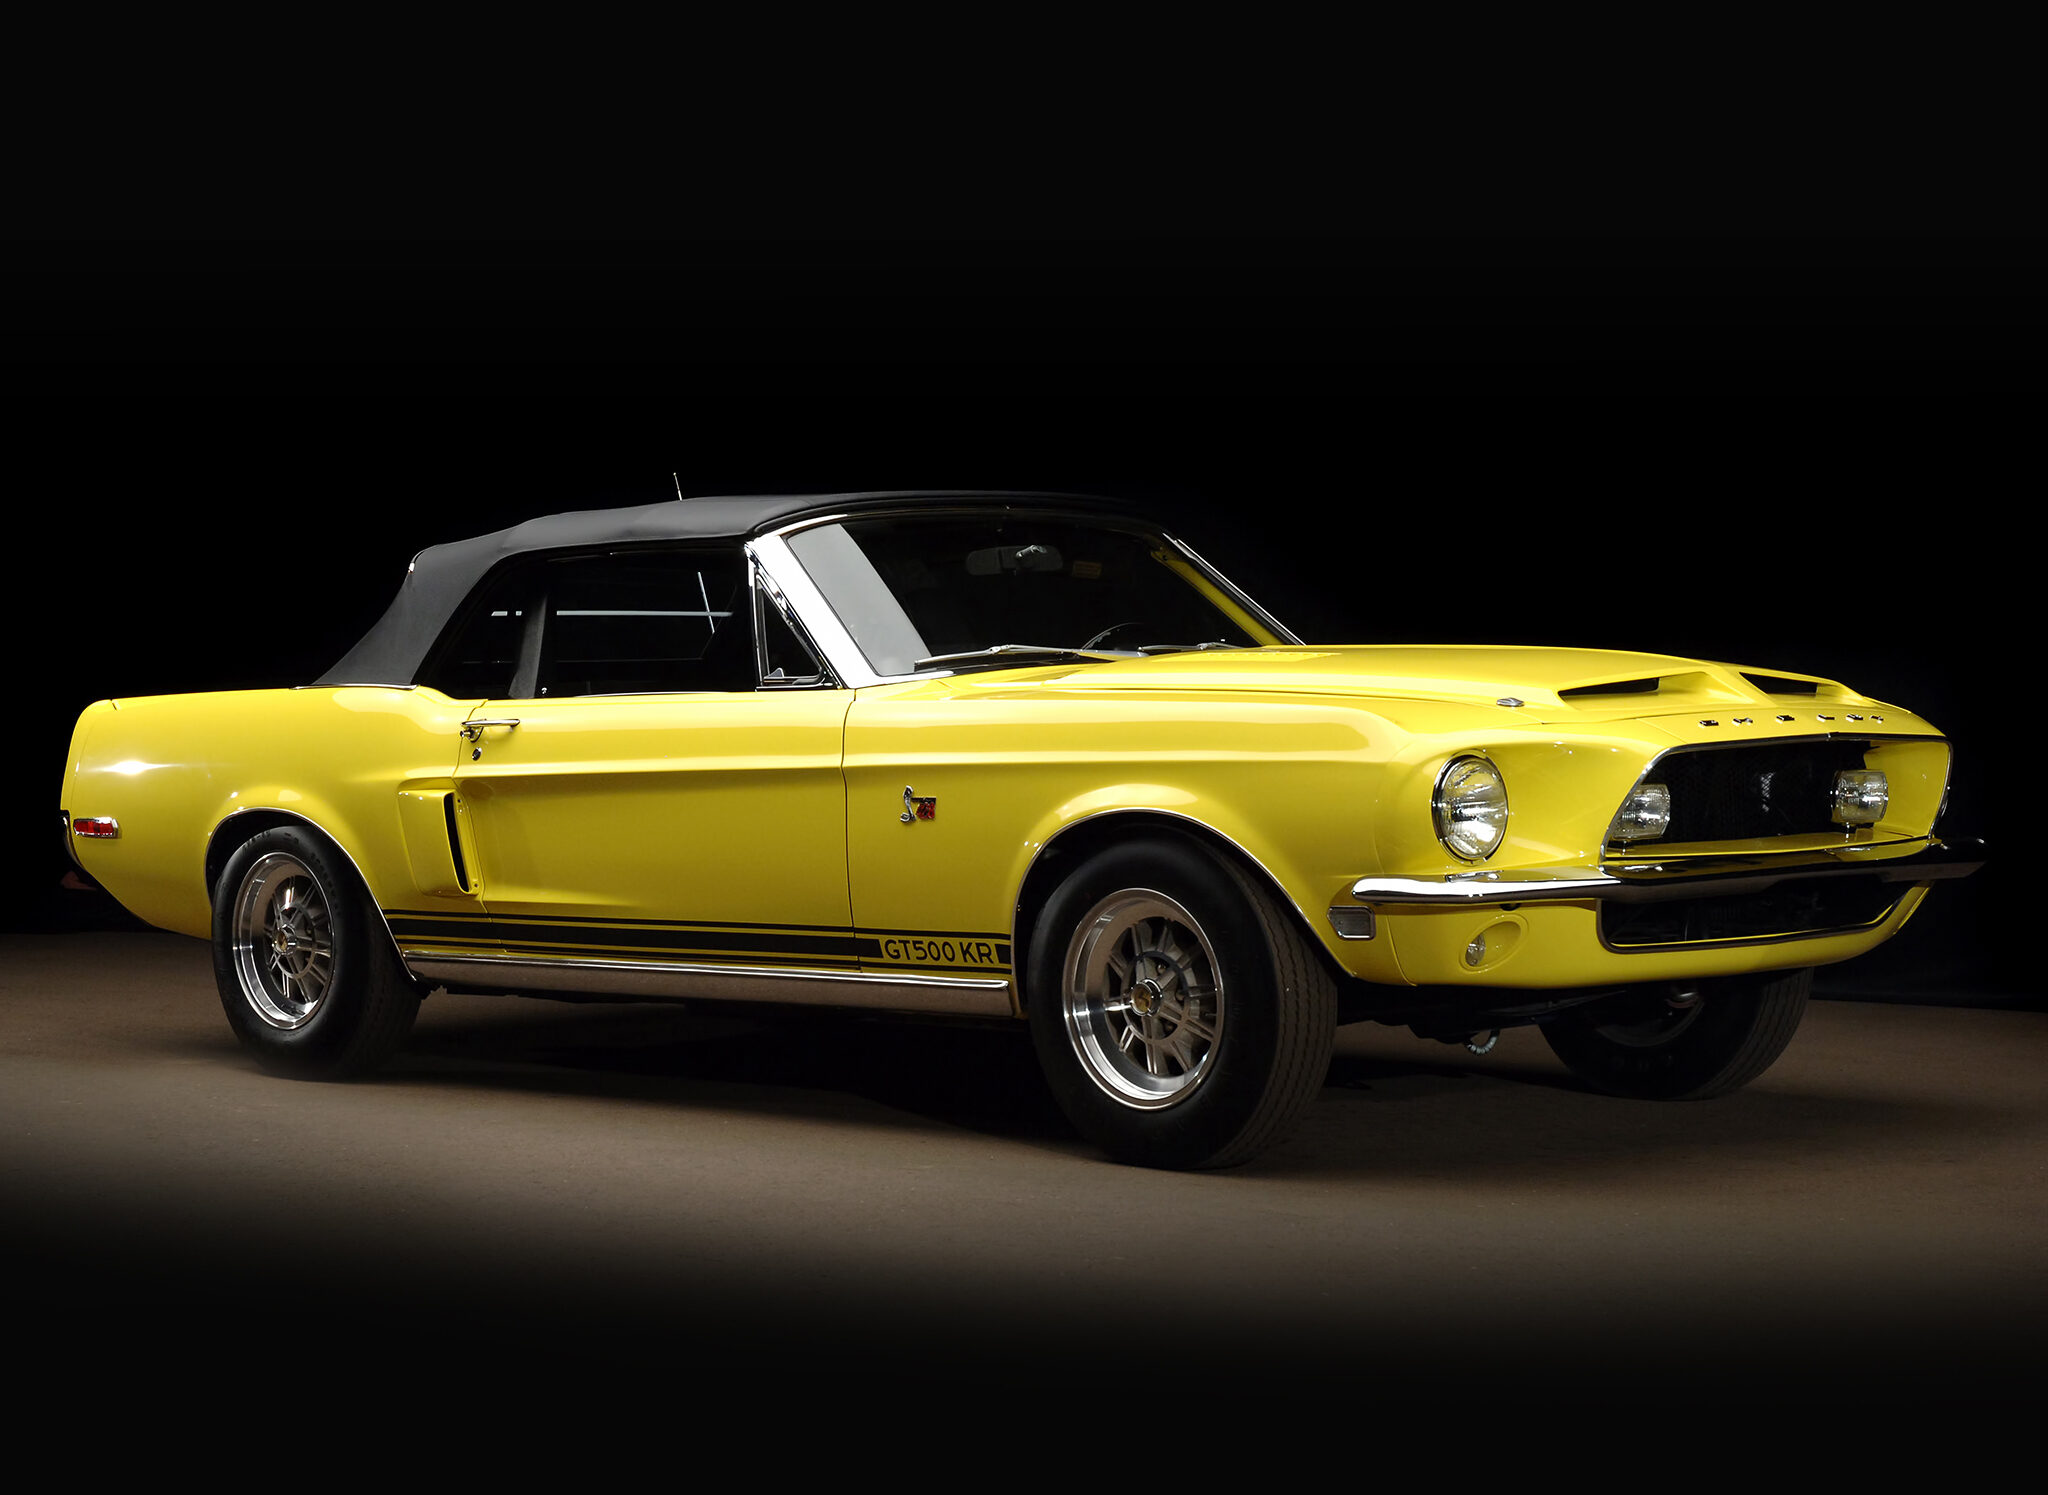 1968 Shelby GT500 KR Convertible, Shelby, Shelby GT500 KR